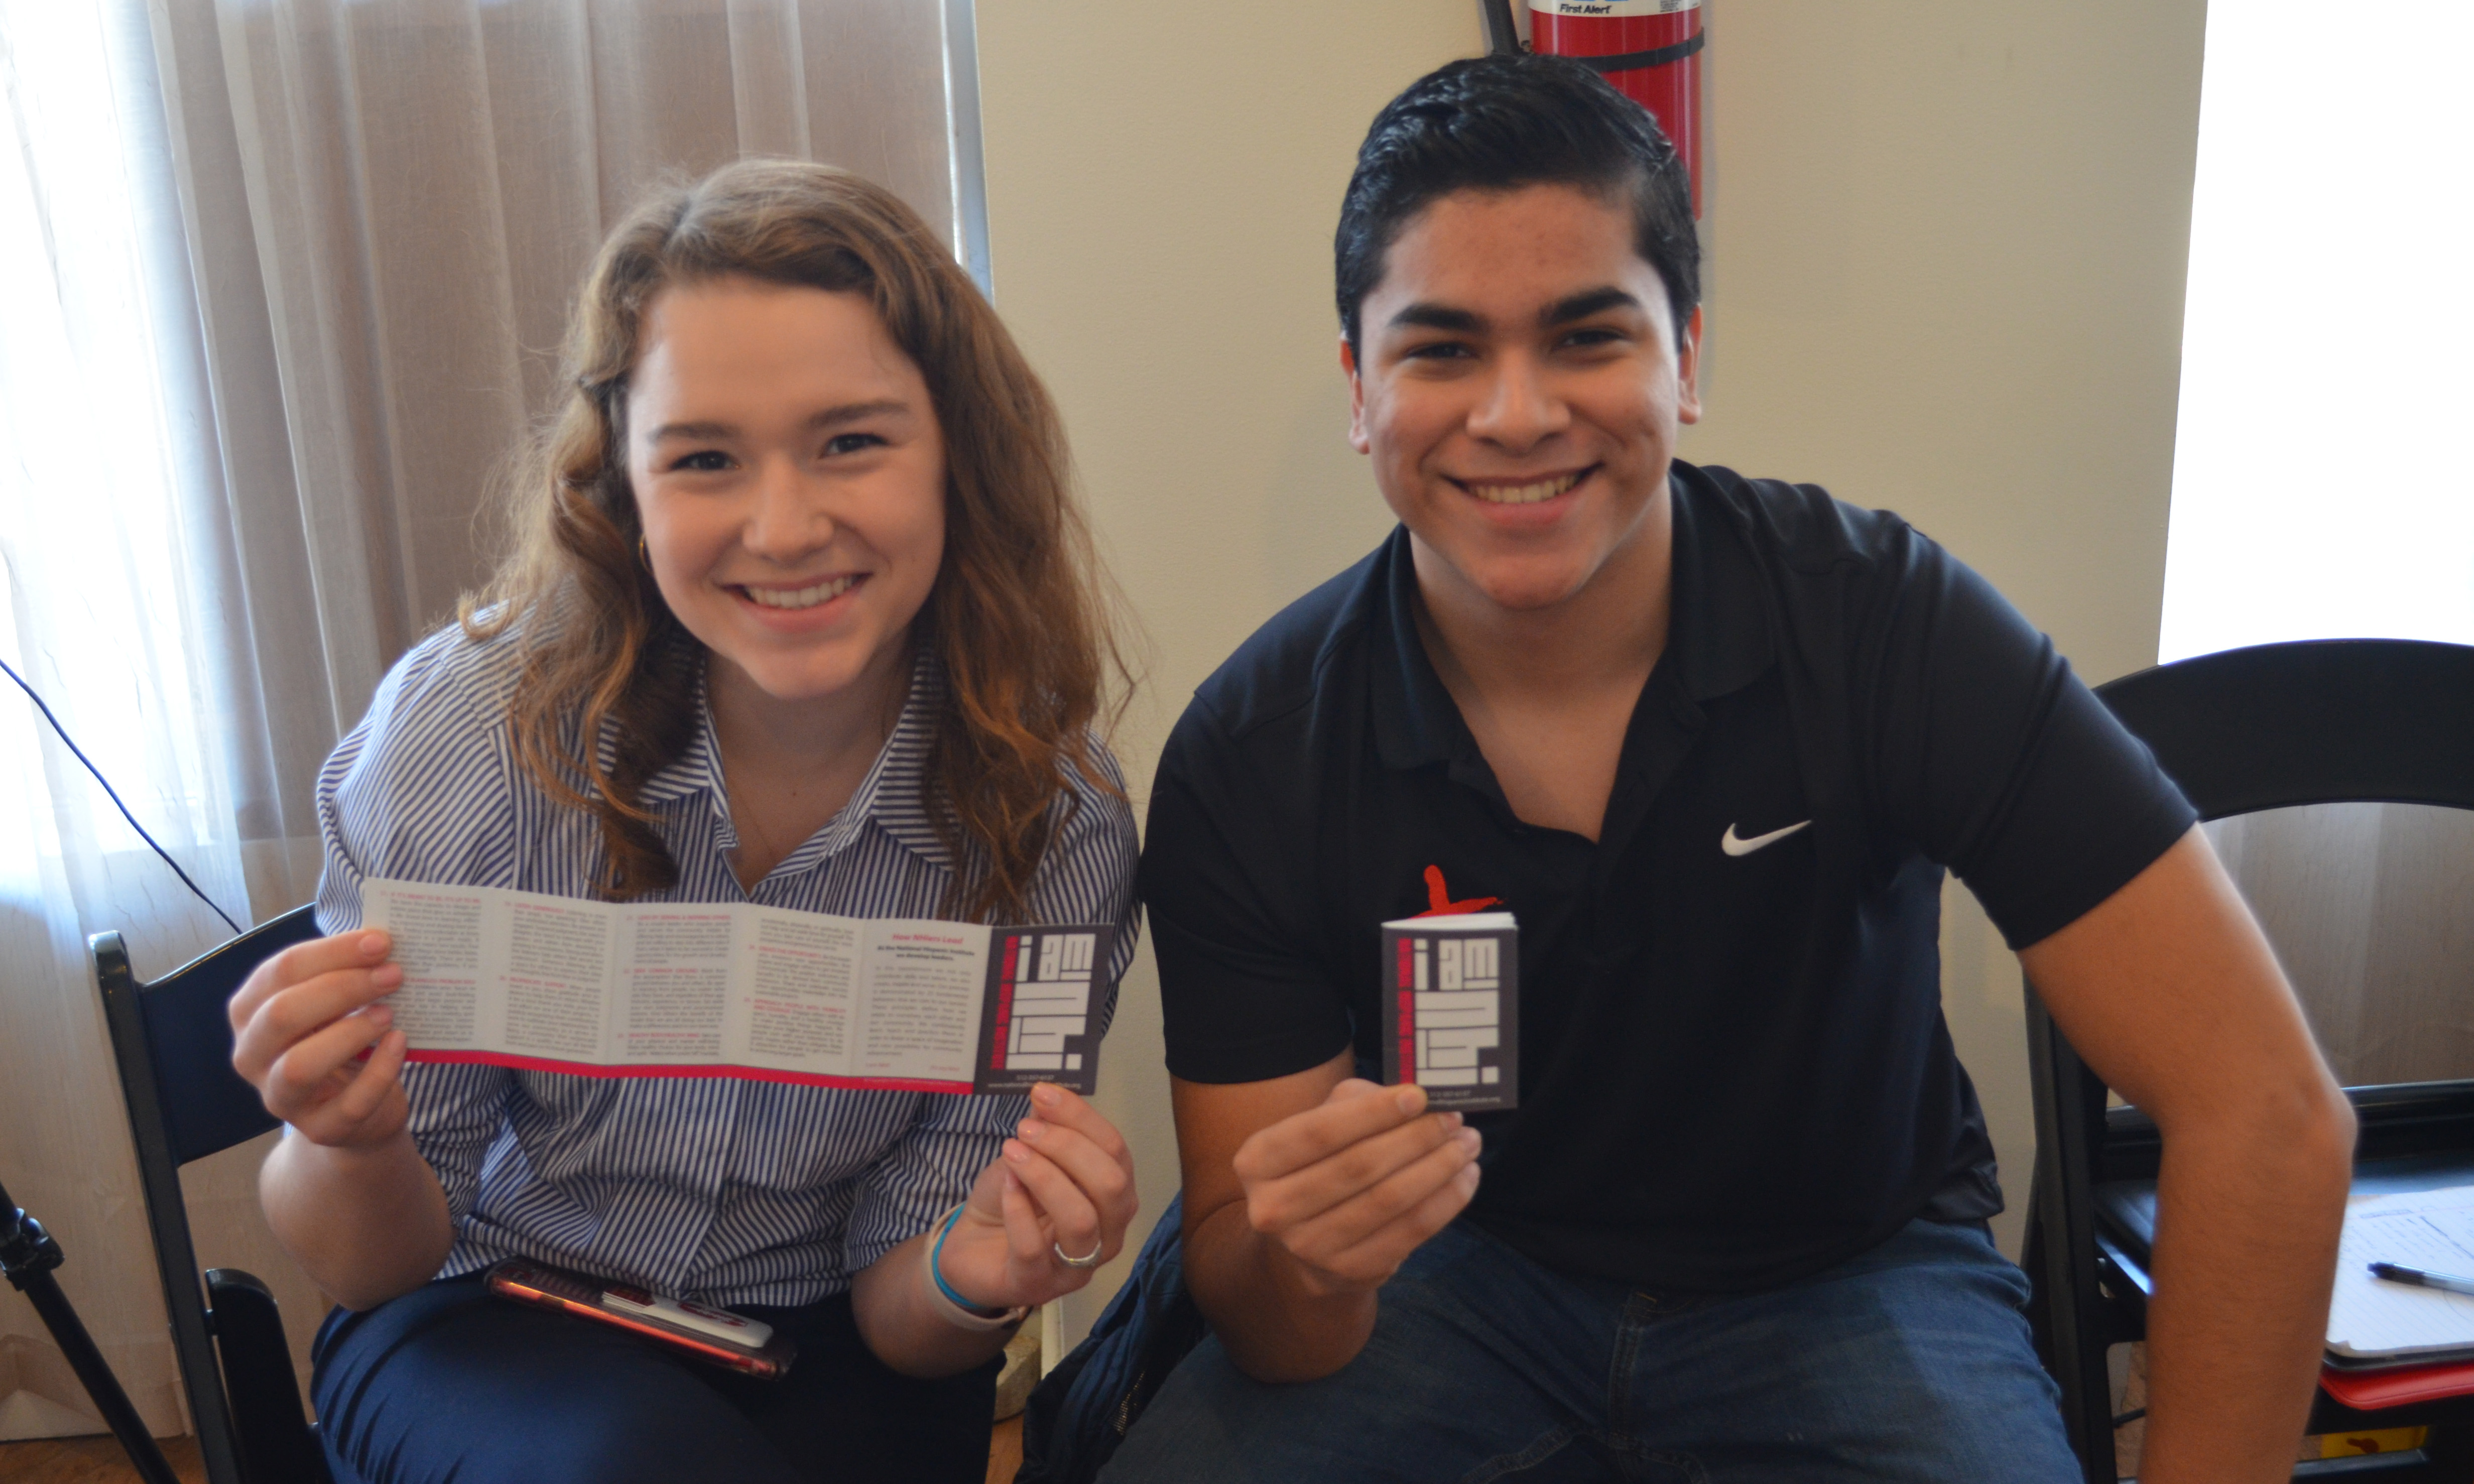 Two NHIers at 2019 PA training, showing off the new NHI Foundations cards